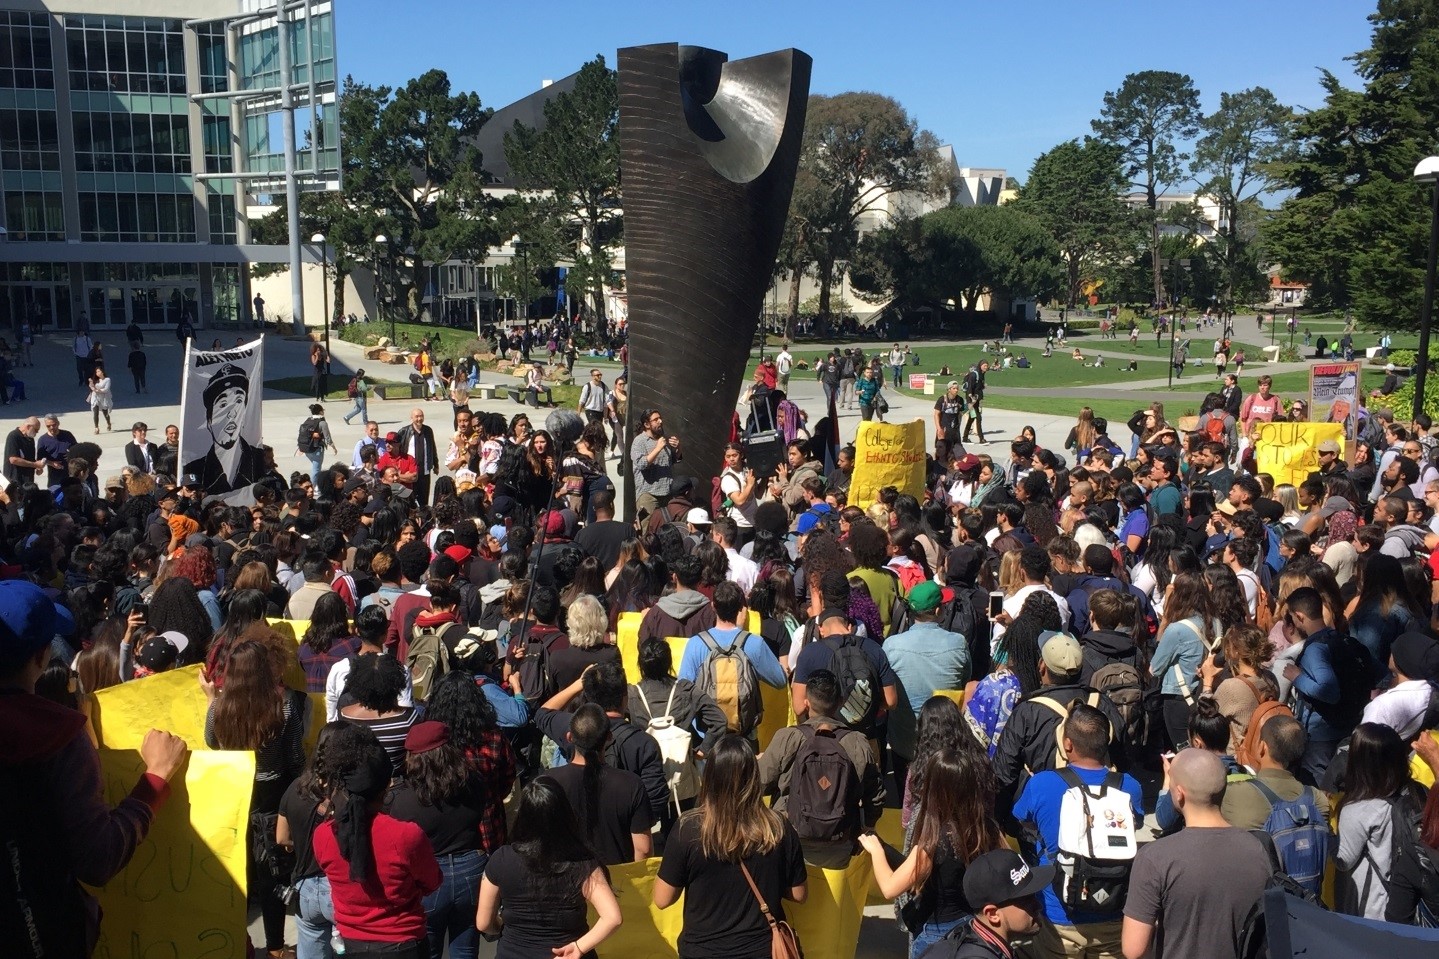 Students gathered on campus with the speaker